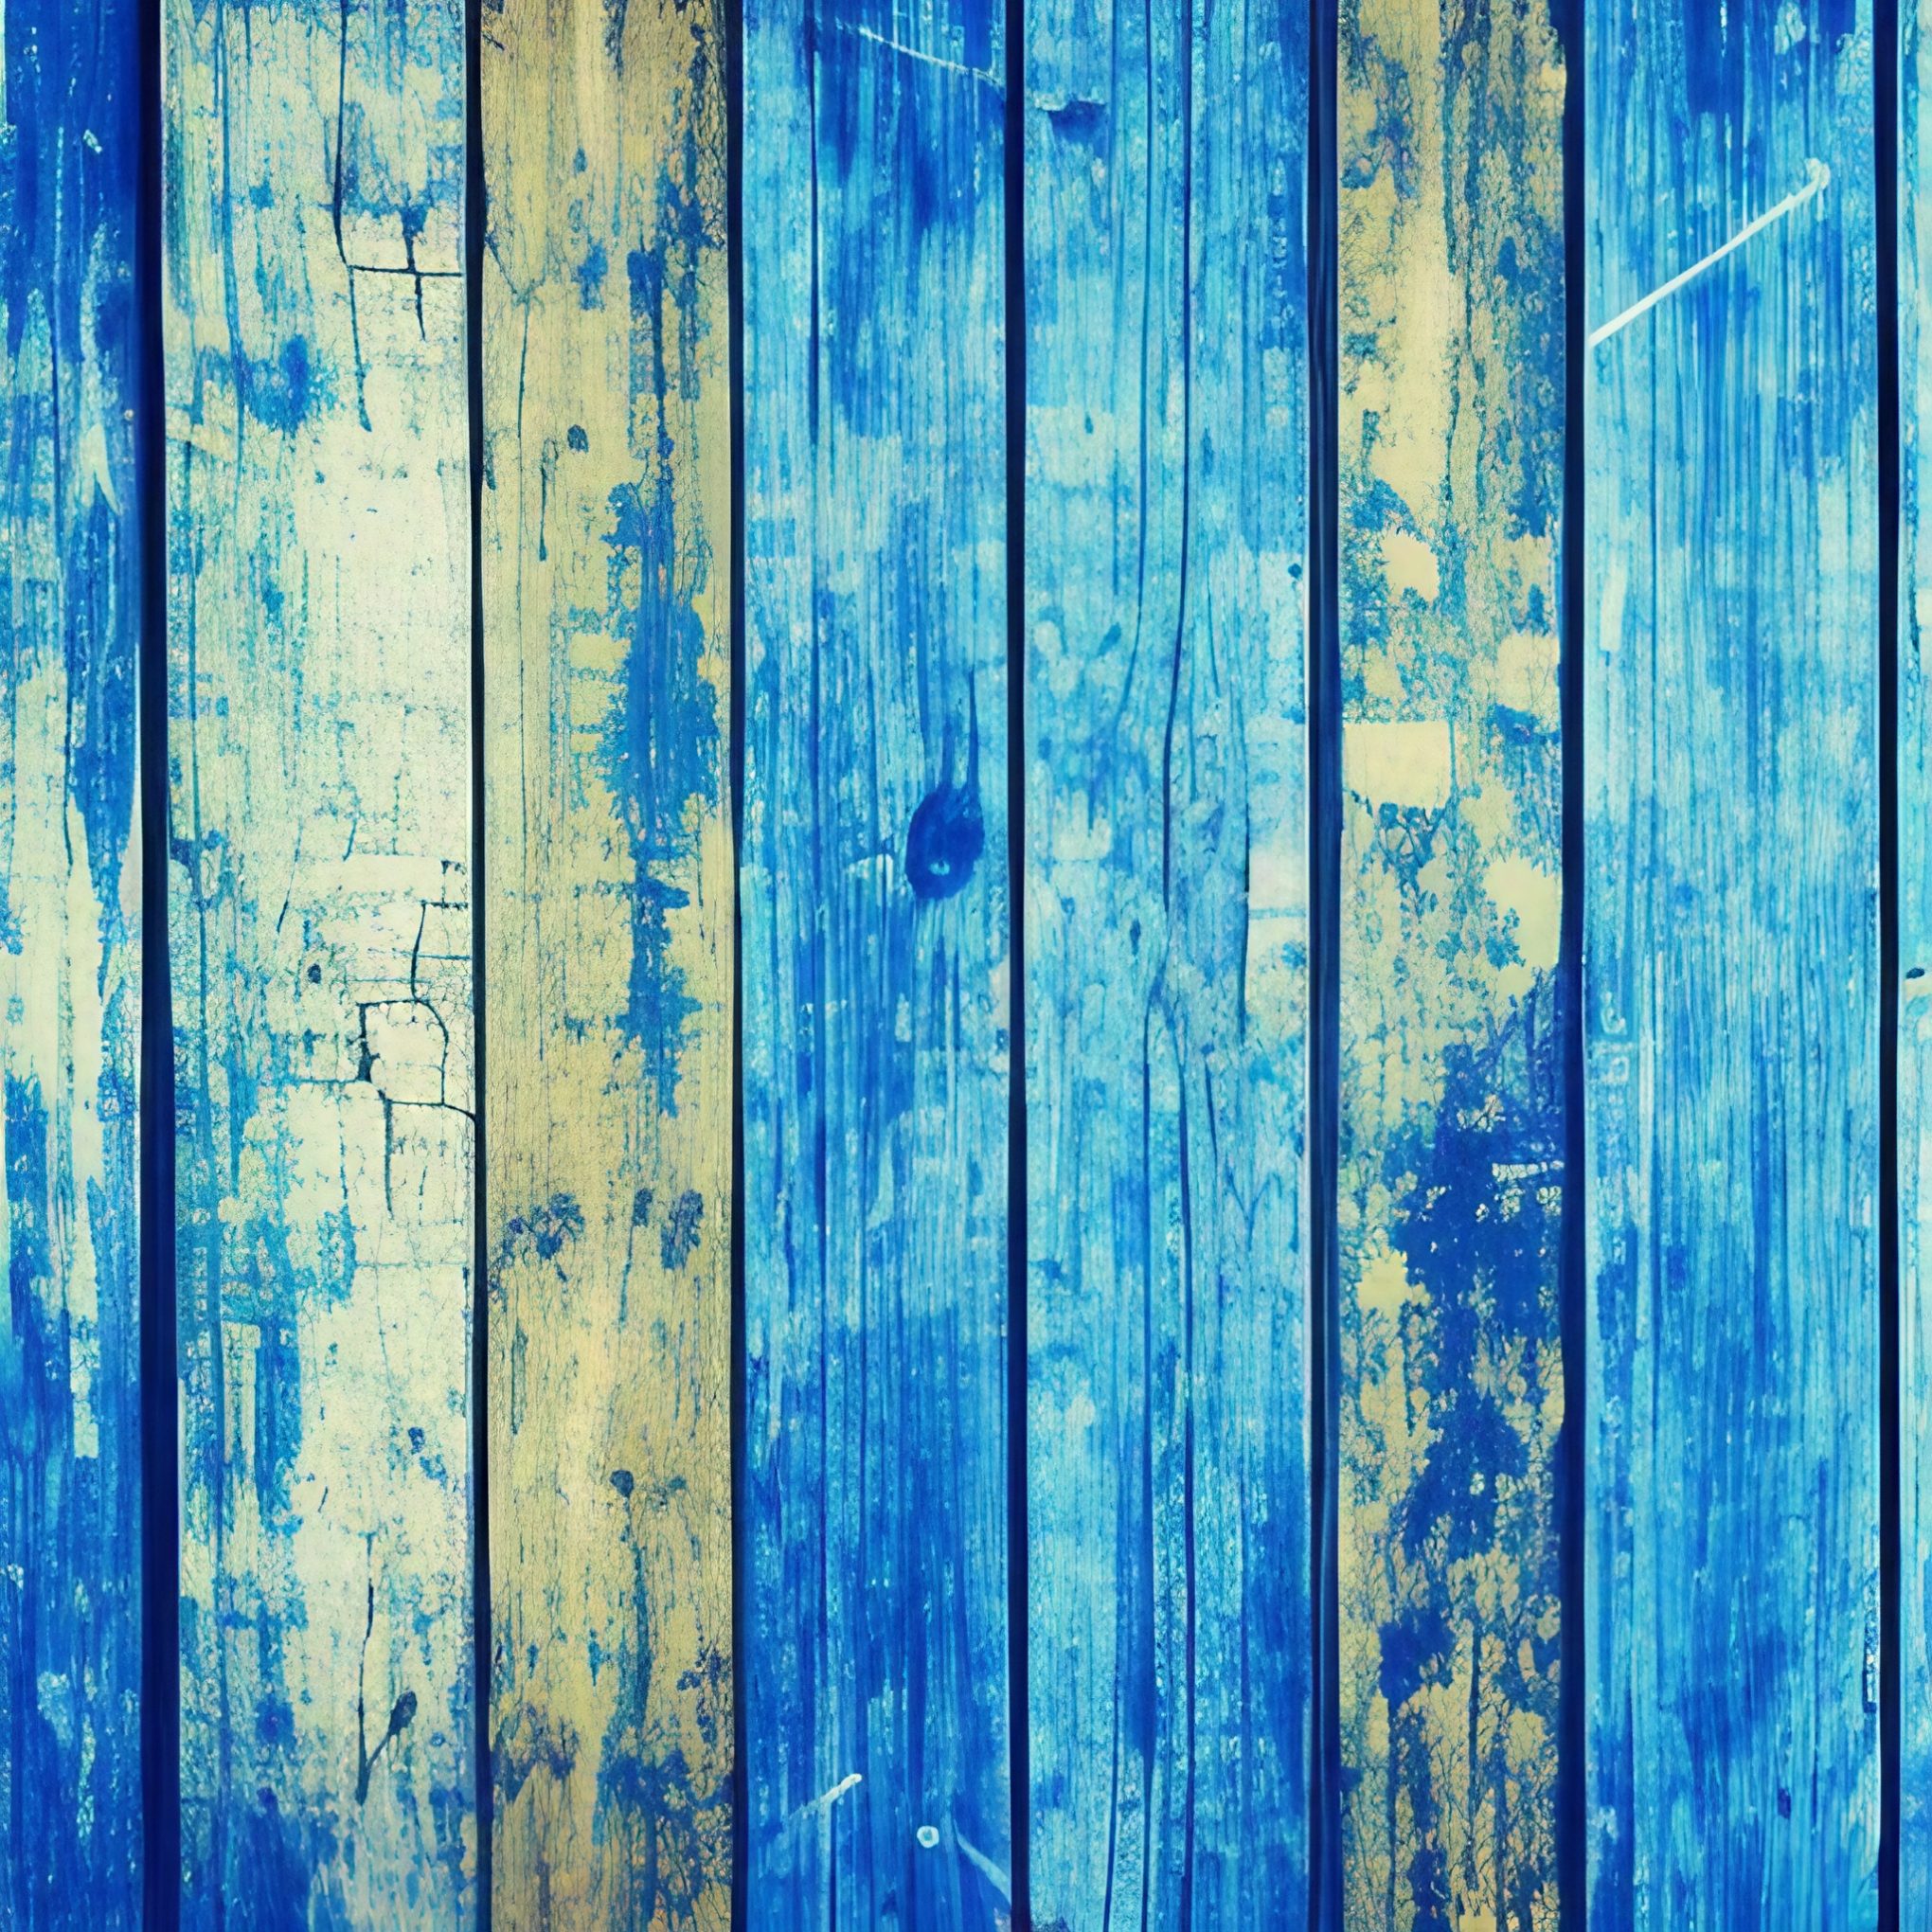 Blue Painted Rustic Worn Wooden Planks